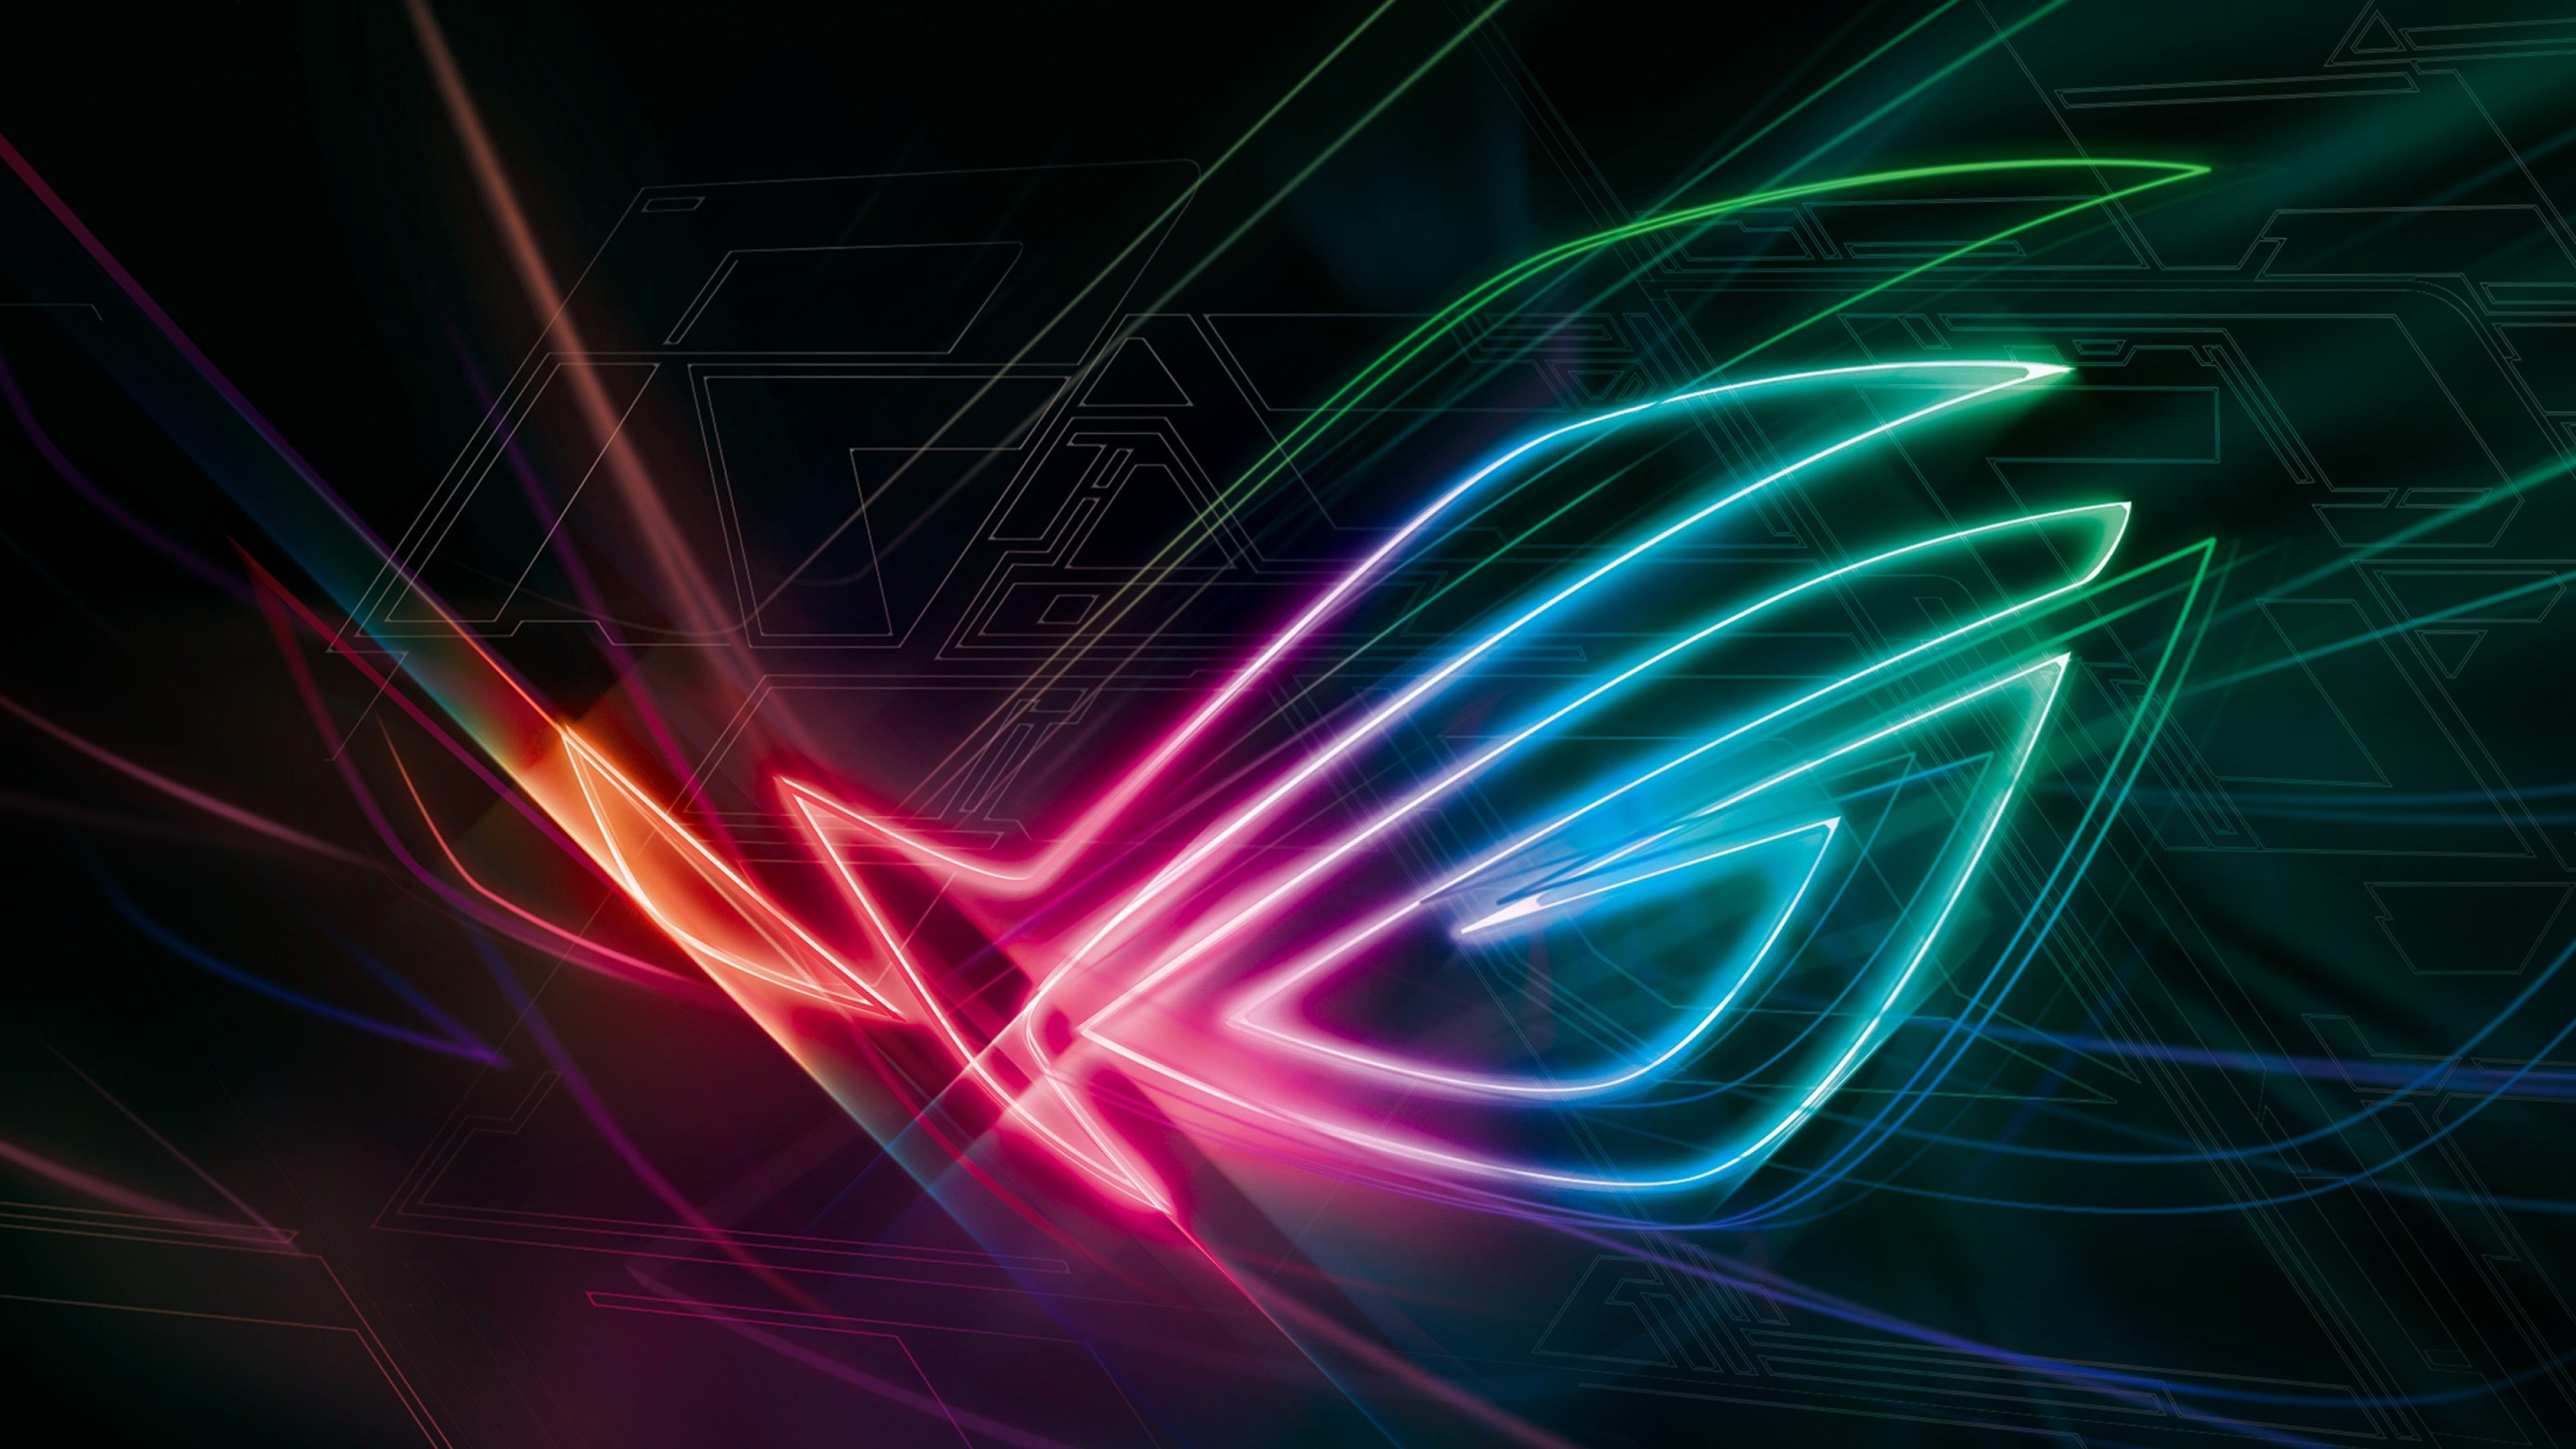 Wallpaper Asus ROG Phone colorful, Android 9 Pie, 4K, OS